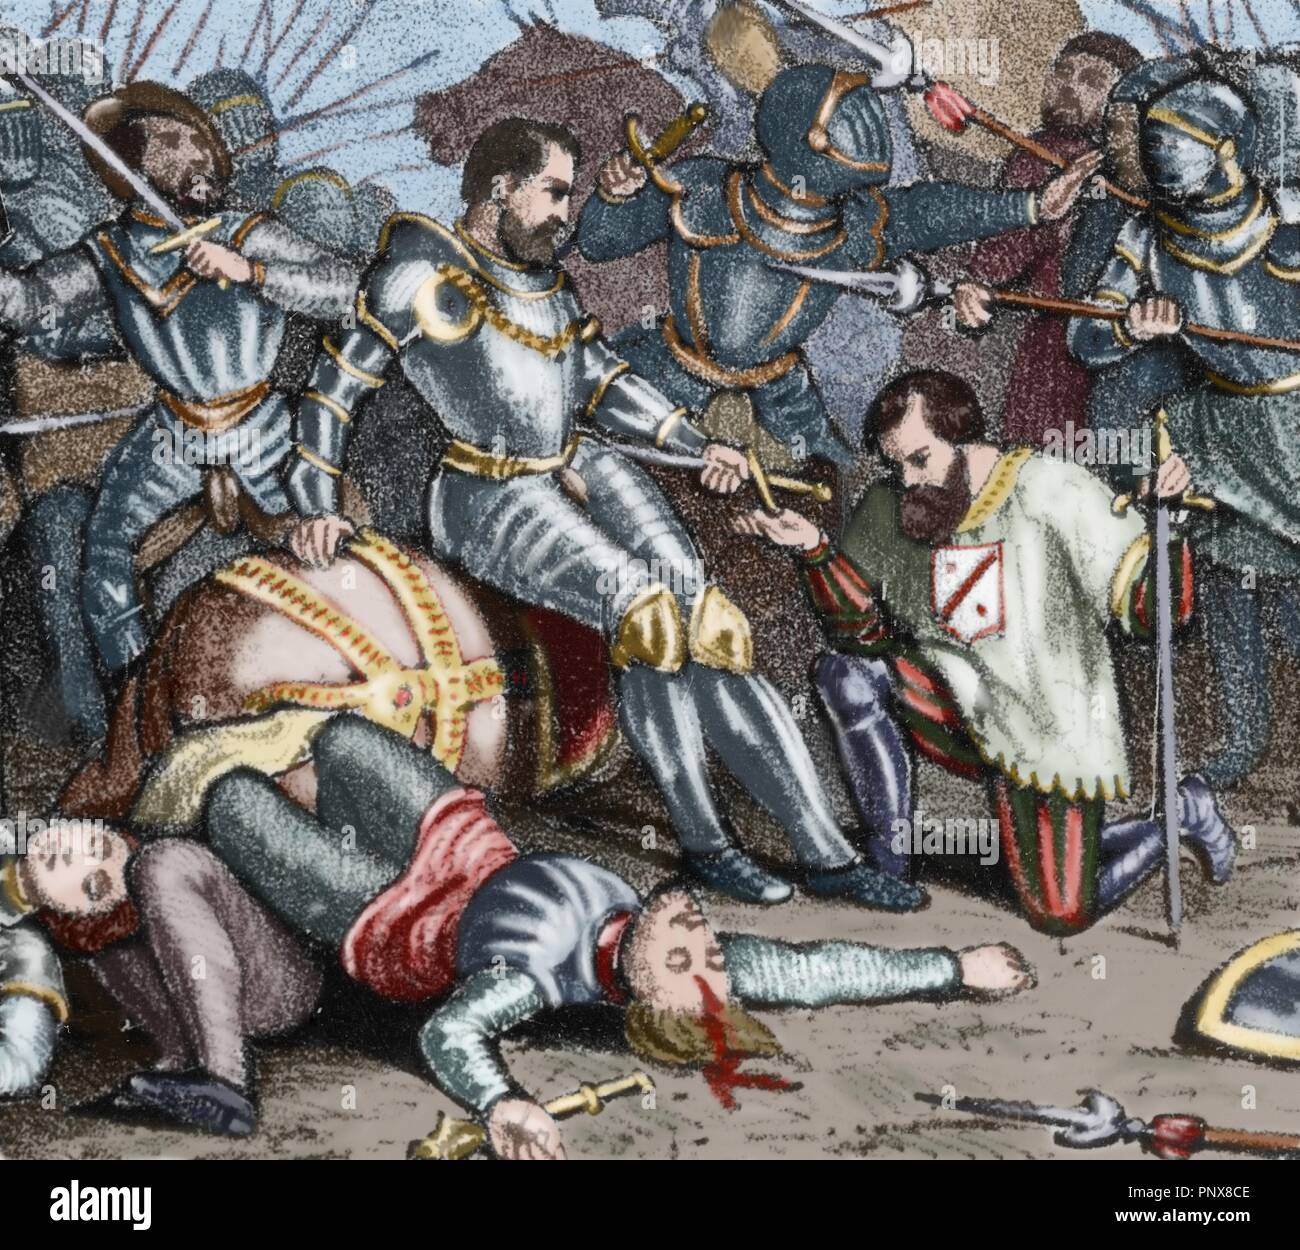 The battle of Pavia. Held on February 24, 1525 between the French army under King Francis I and German-Spanish troops of Emperor Charles V, who were the winner. Francis I of France was taken prisoner after his defeat. Colored engraving. Stock Photo